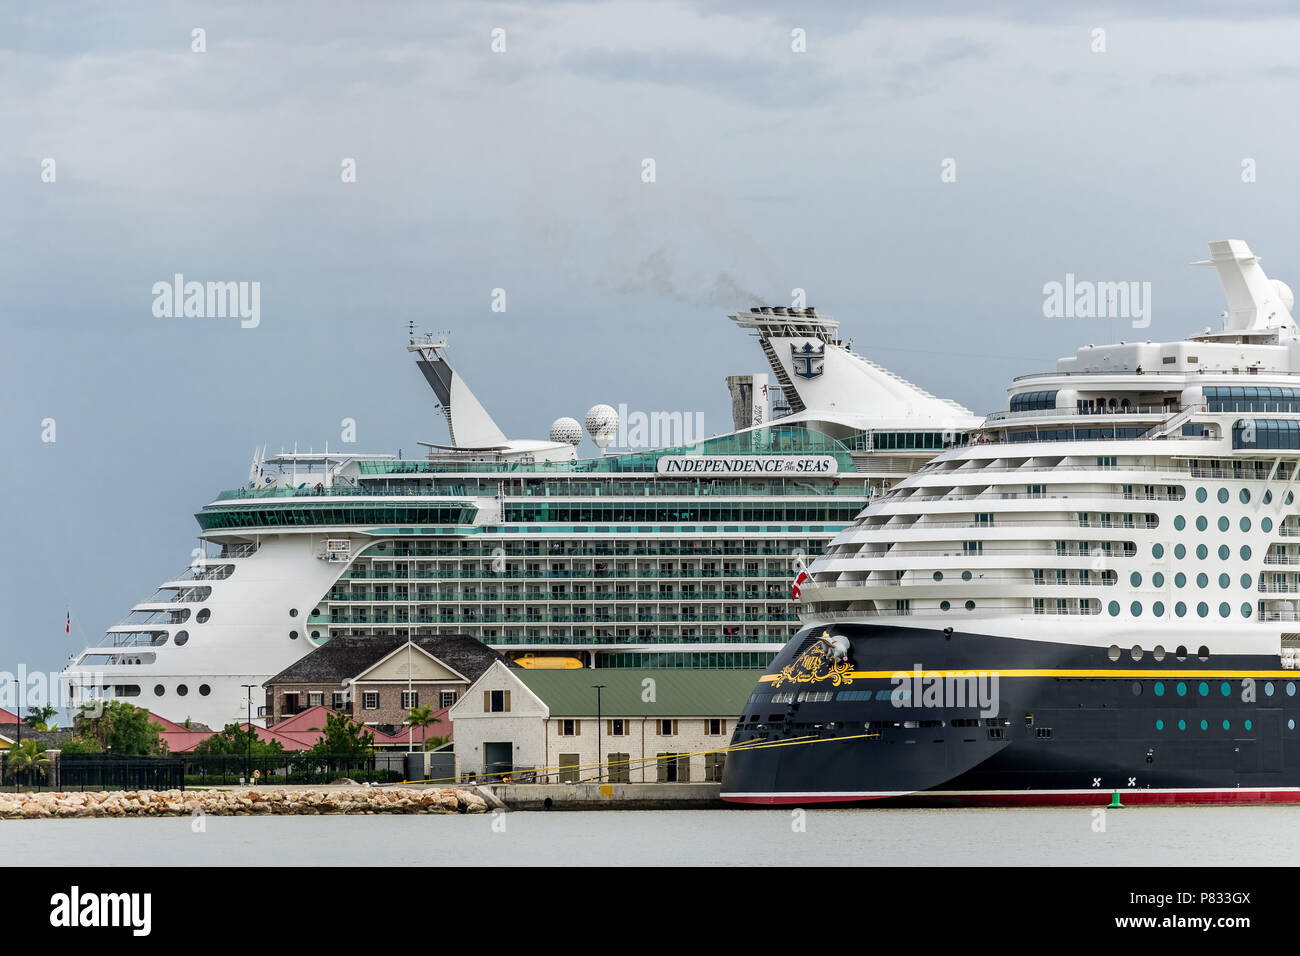 Falmouth, Jamaica - June 03 2015: Disney Fantasy and Royal Caribbean Independence of the Seas cruise ships docked side by side at the Falmouth Cruise Stock Photo